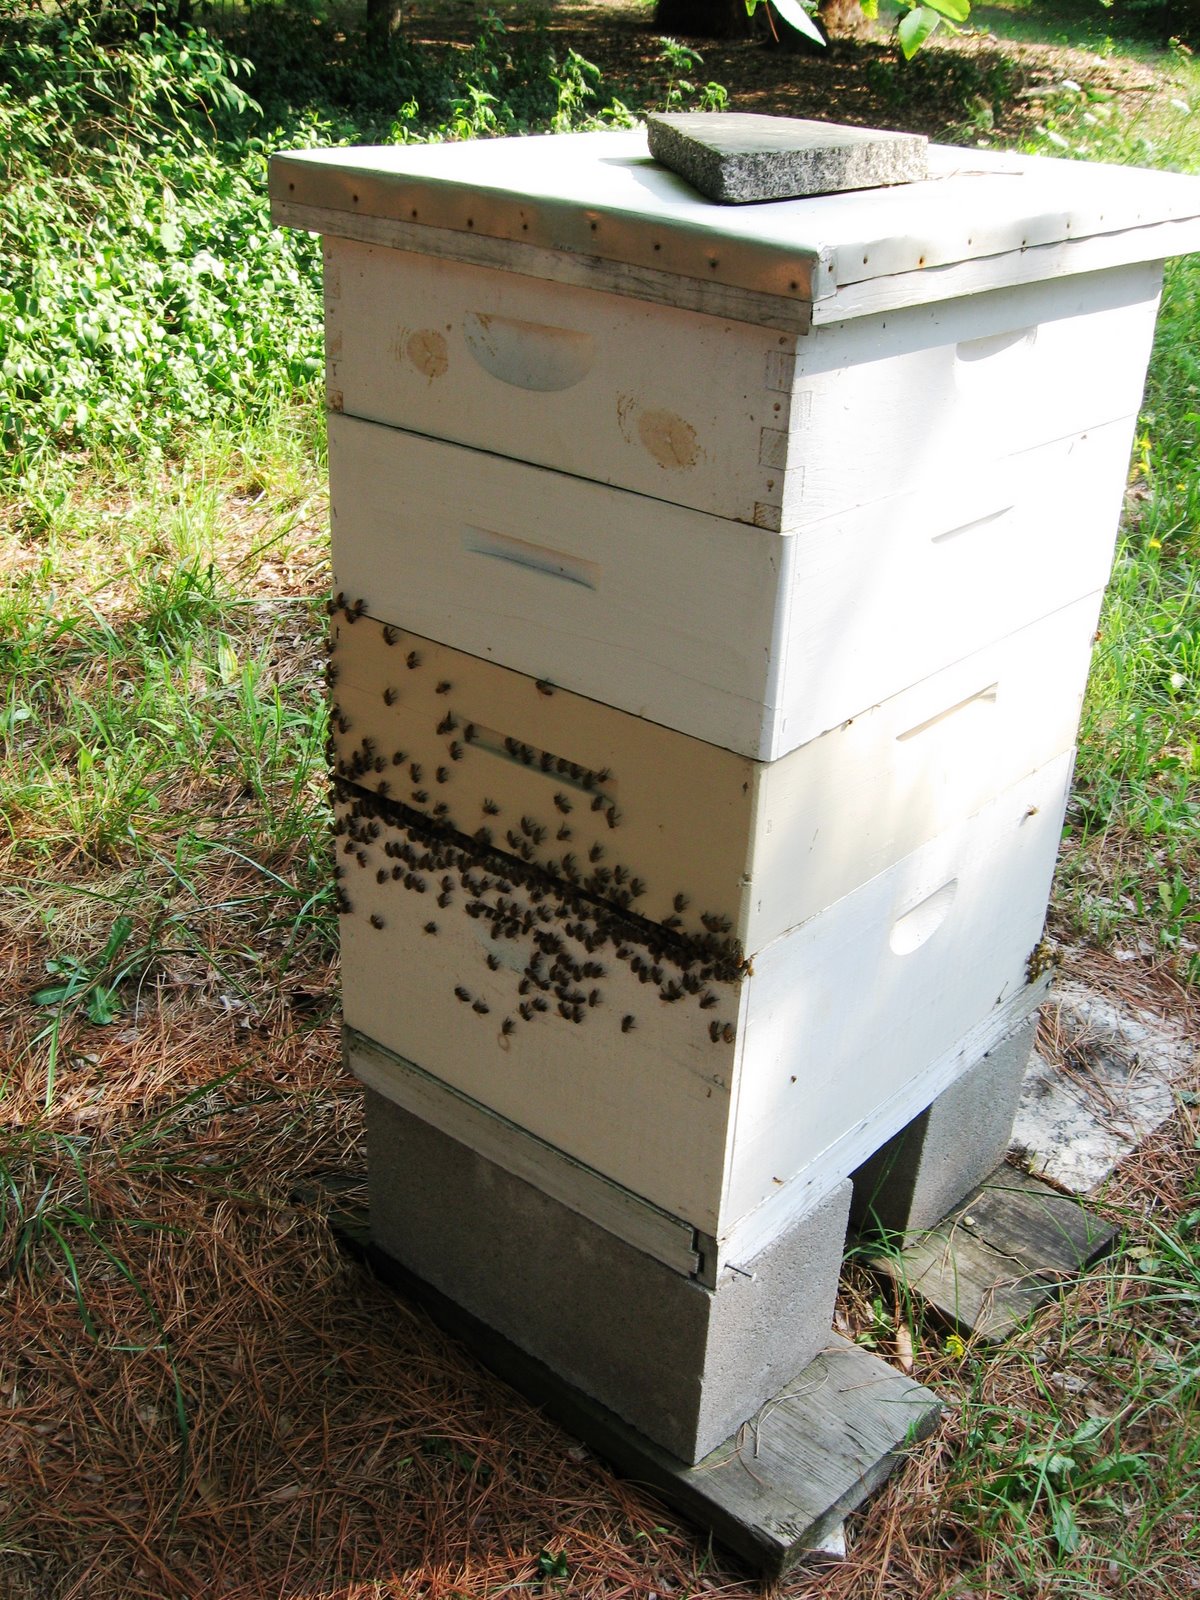 [072198+Bees+and+Putting+Honey+in+Jars+016.jpg]